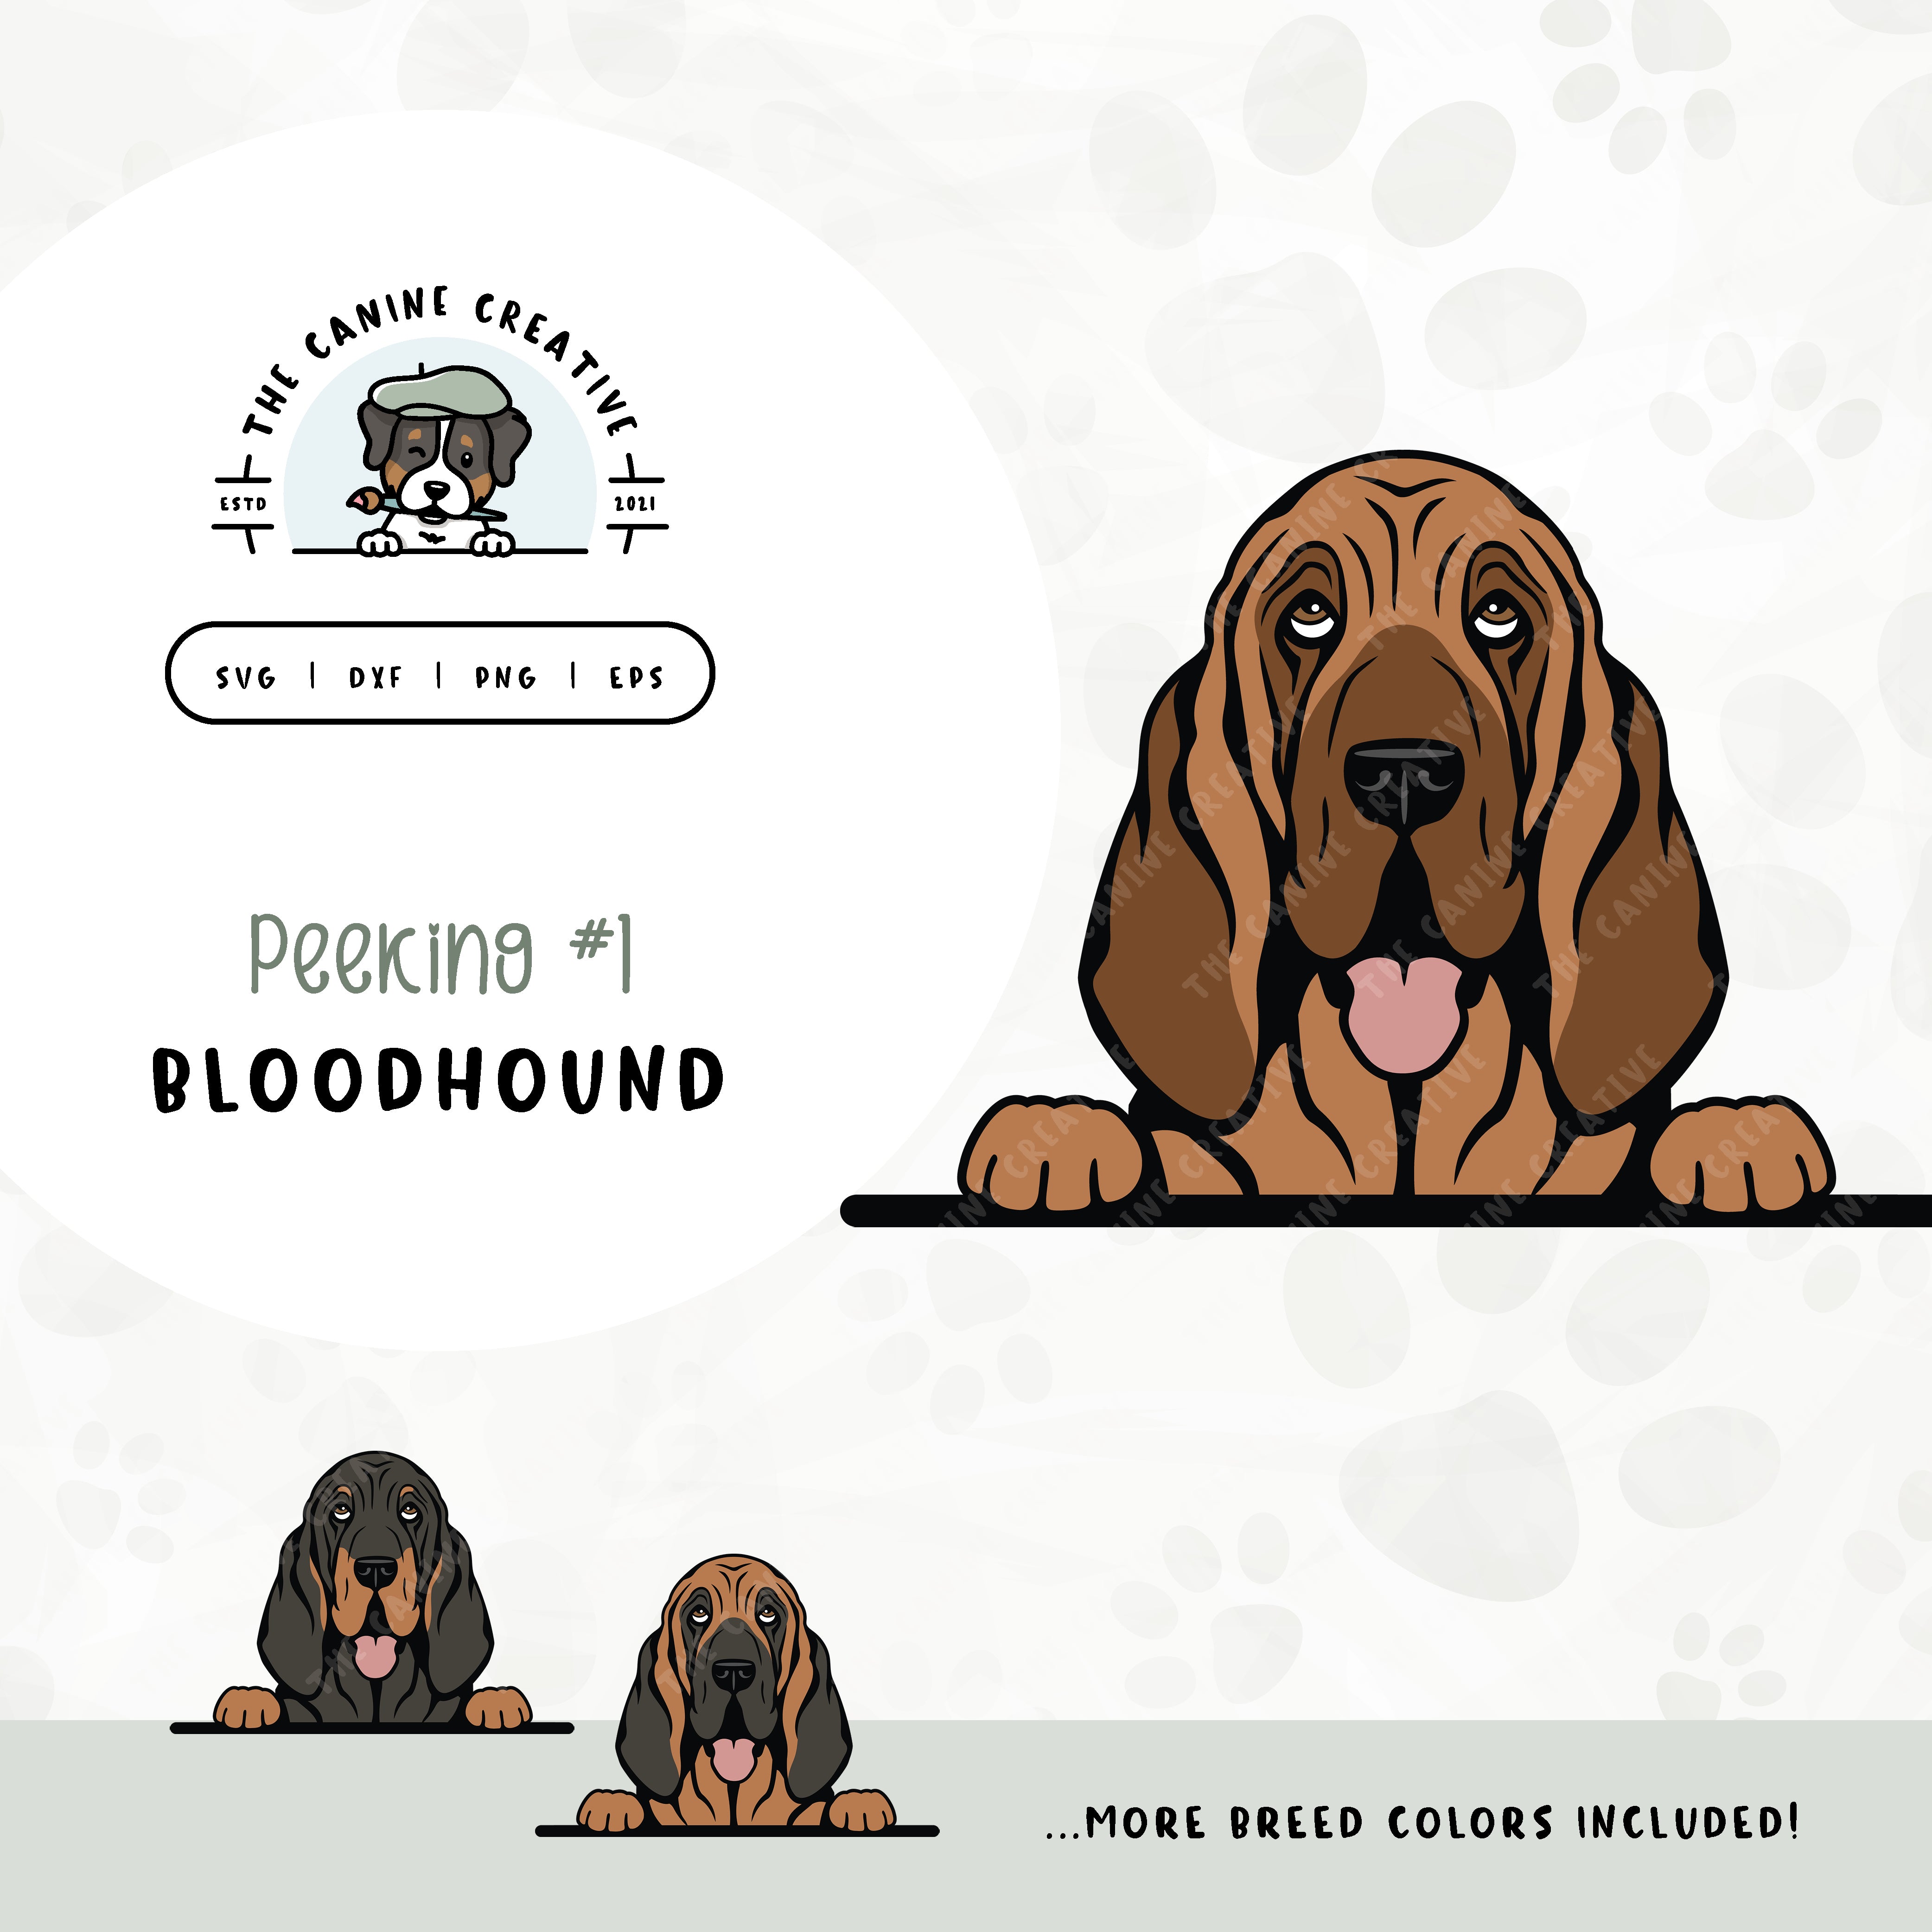 This illustrated design features a peeking Bloodhound. File formats include: SVG, DXF, PNG, and EPS.